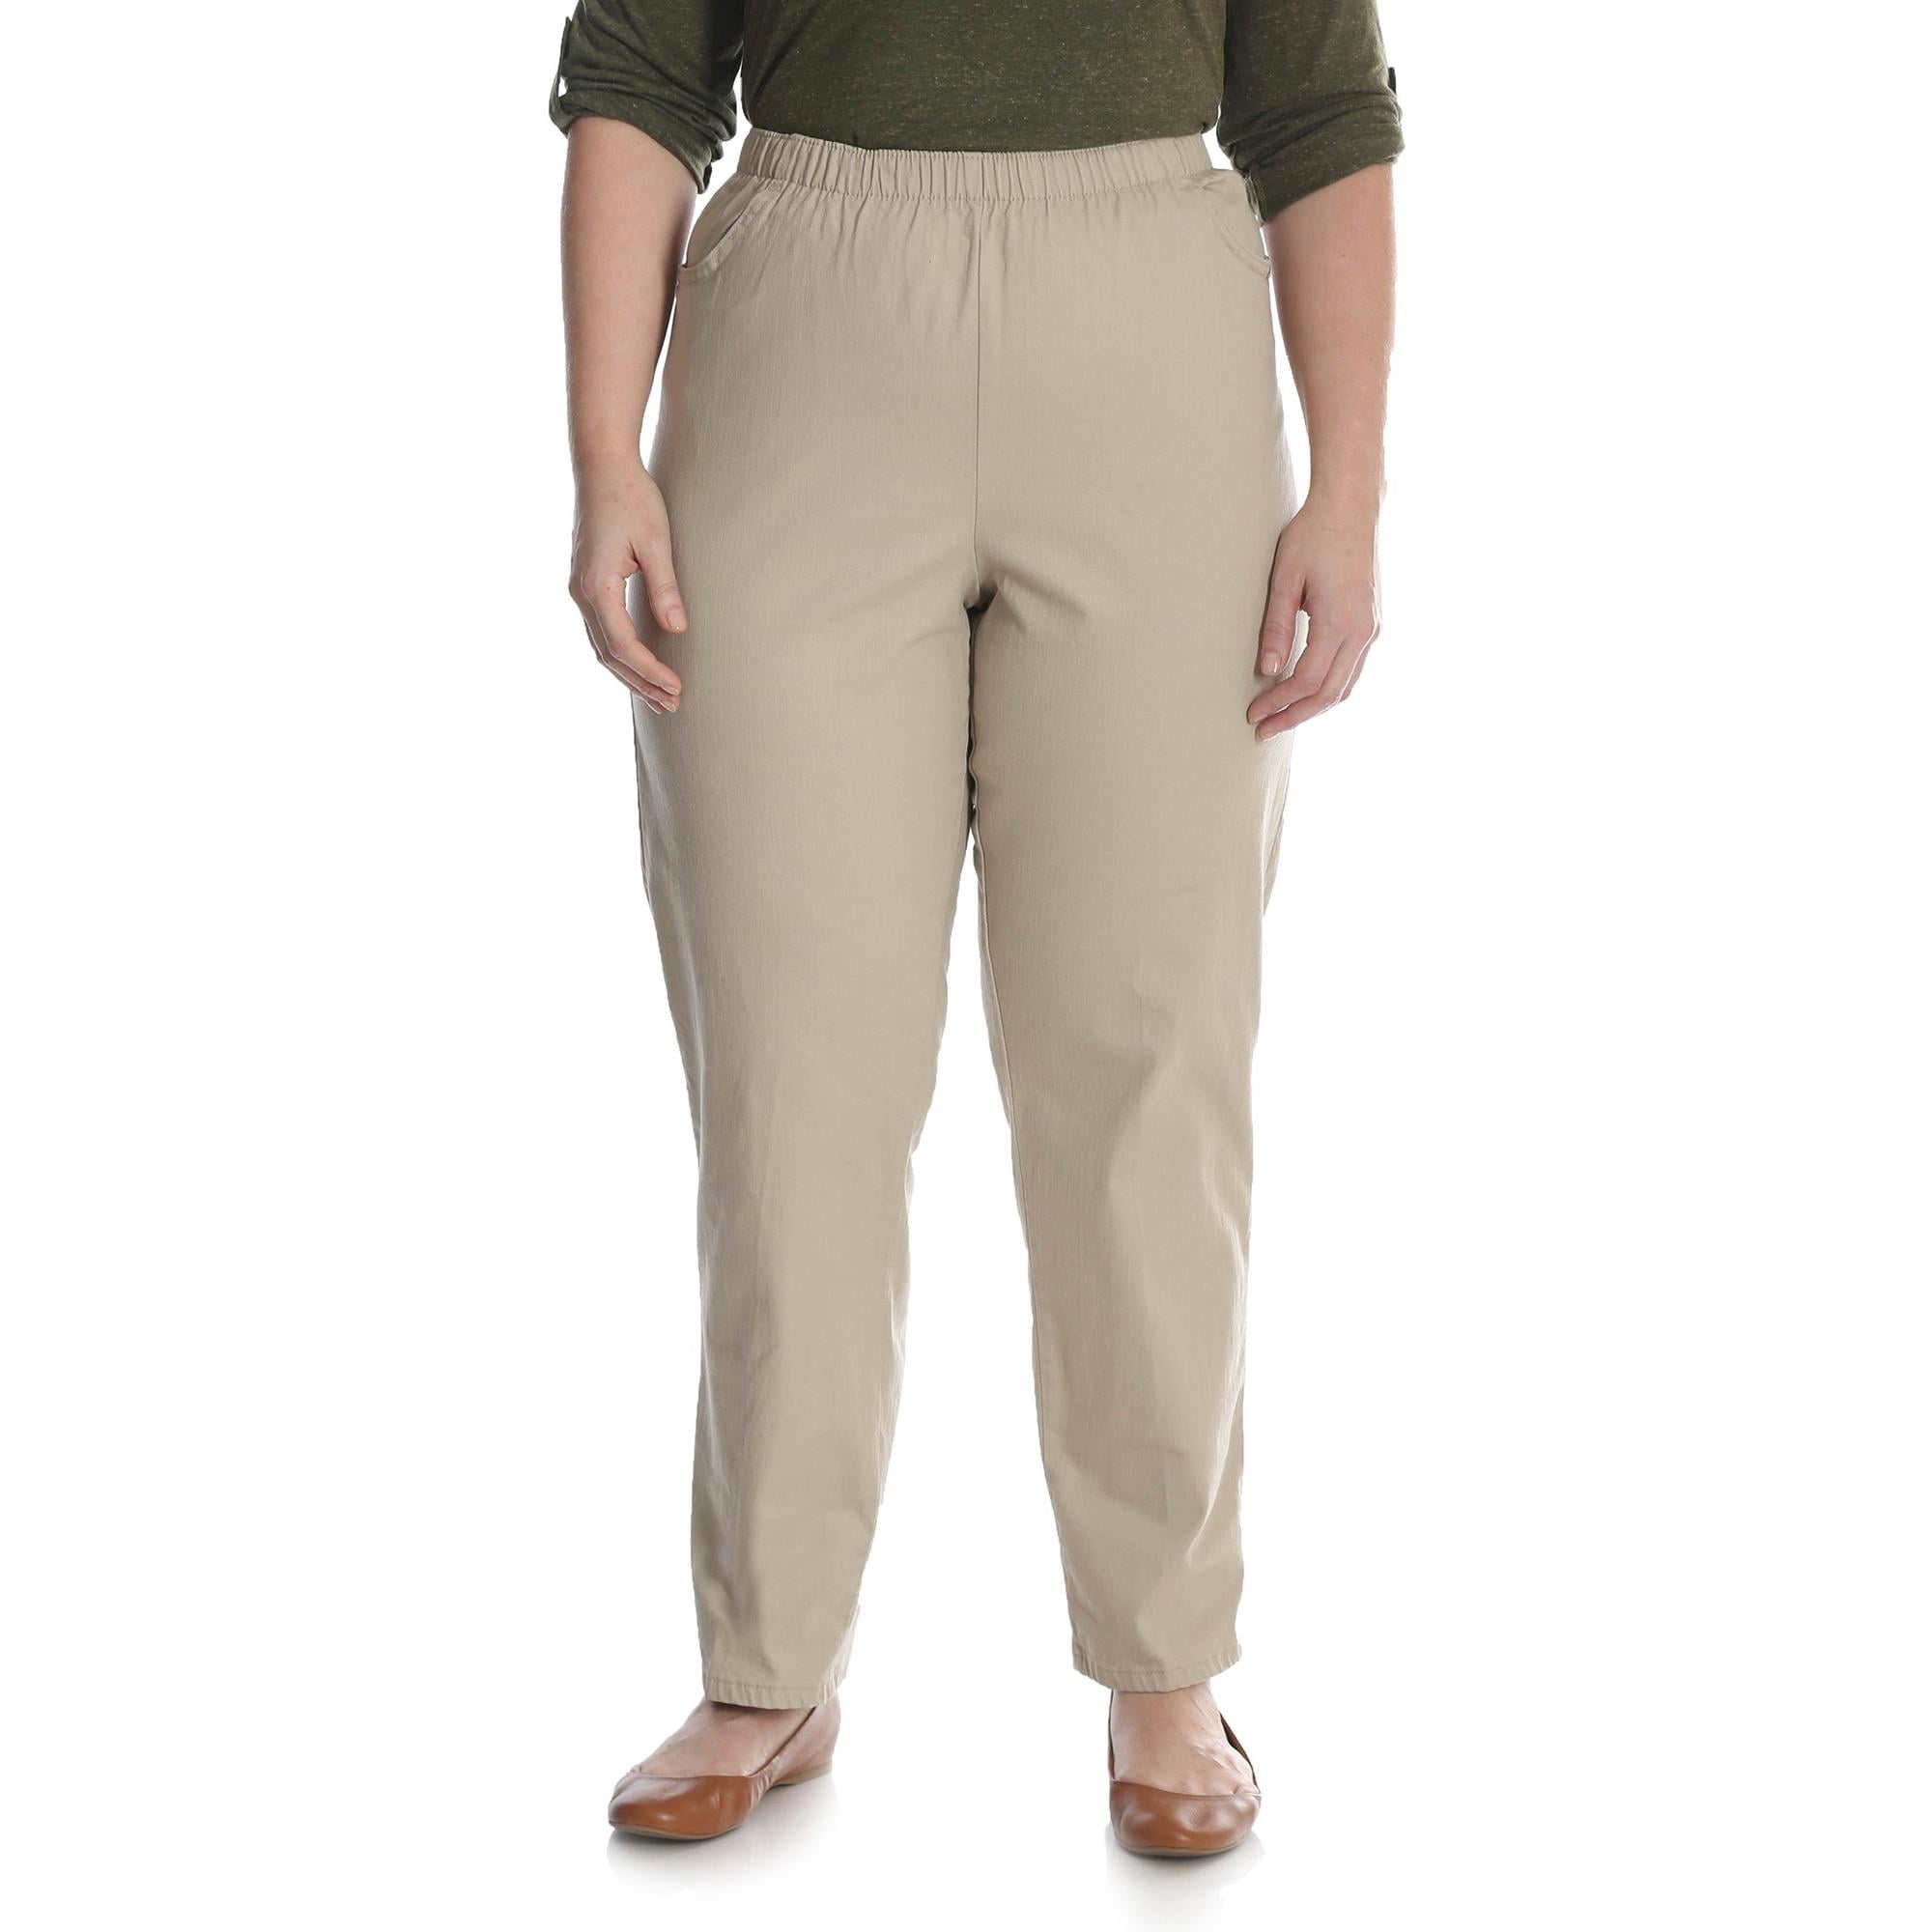 BEING CASUAL LIGHTWEIGHT TROUSERS PLUS SIZES 28 & 32 SIMPLY BE  2 COLOURS STONE 